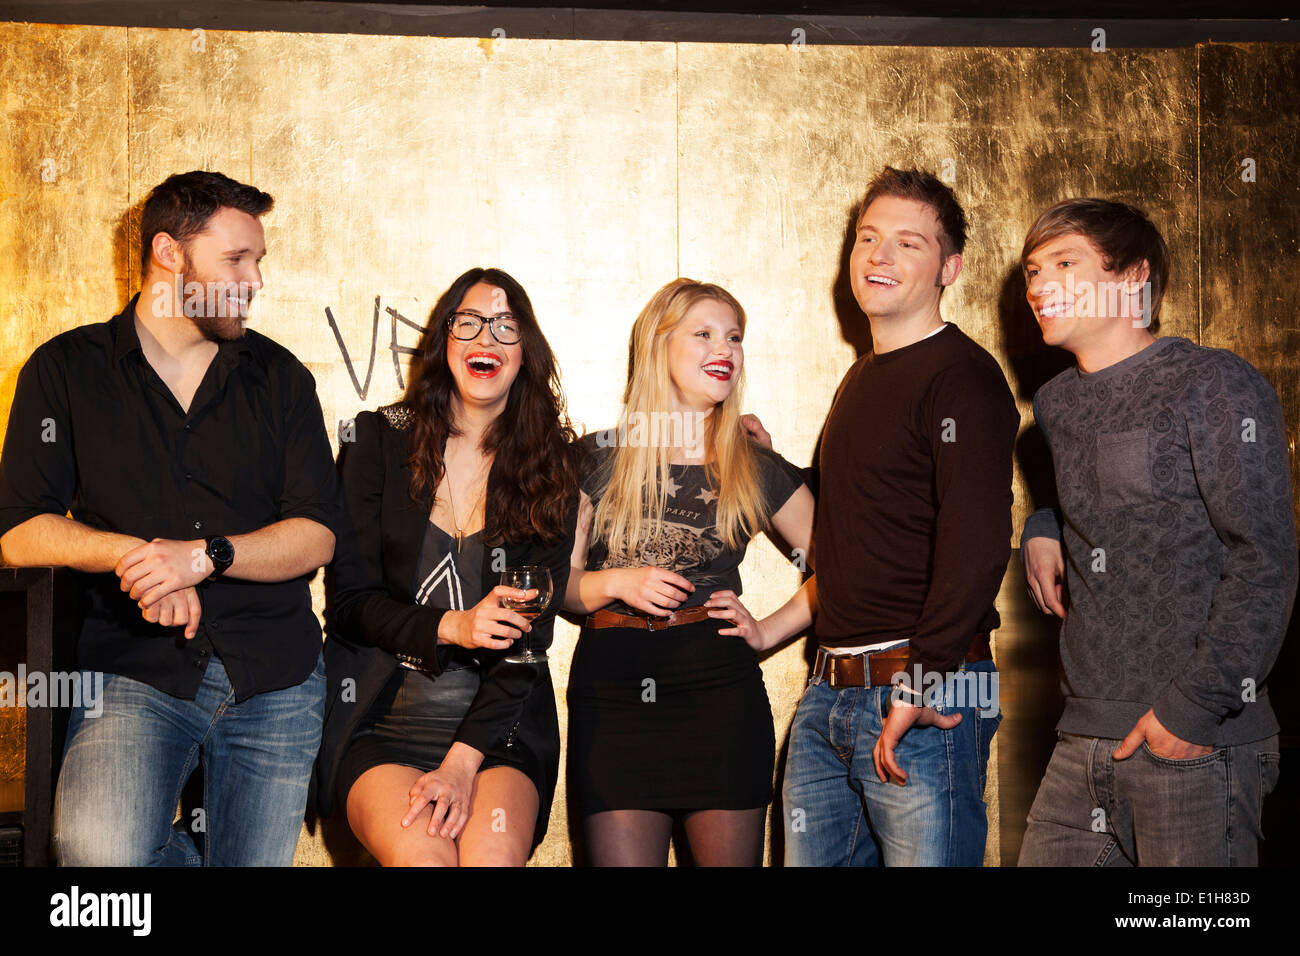 Group of friends having a laugh in nightclub Stock Photo